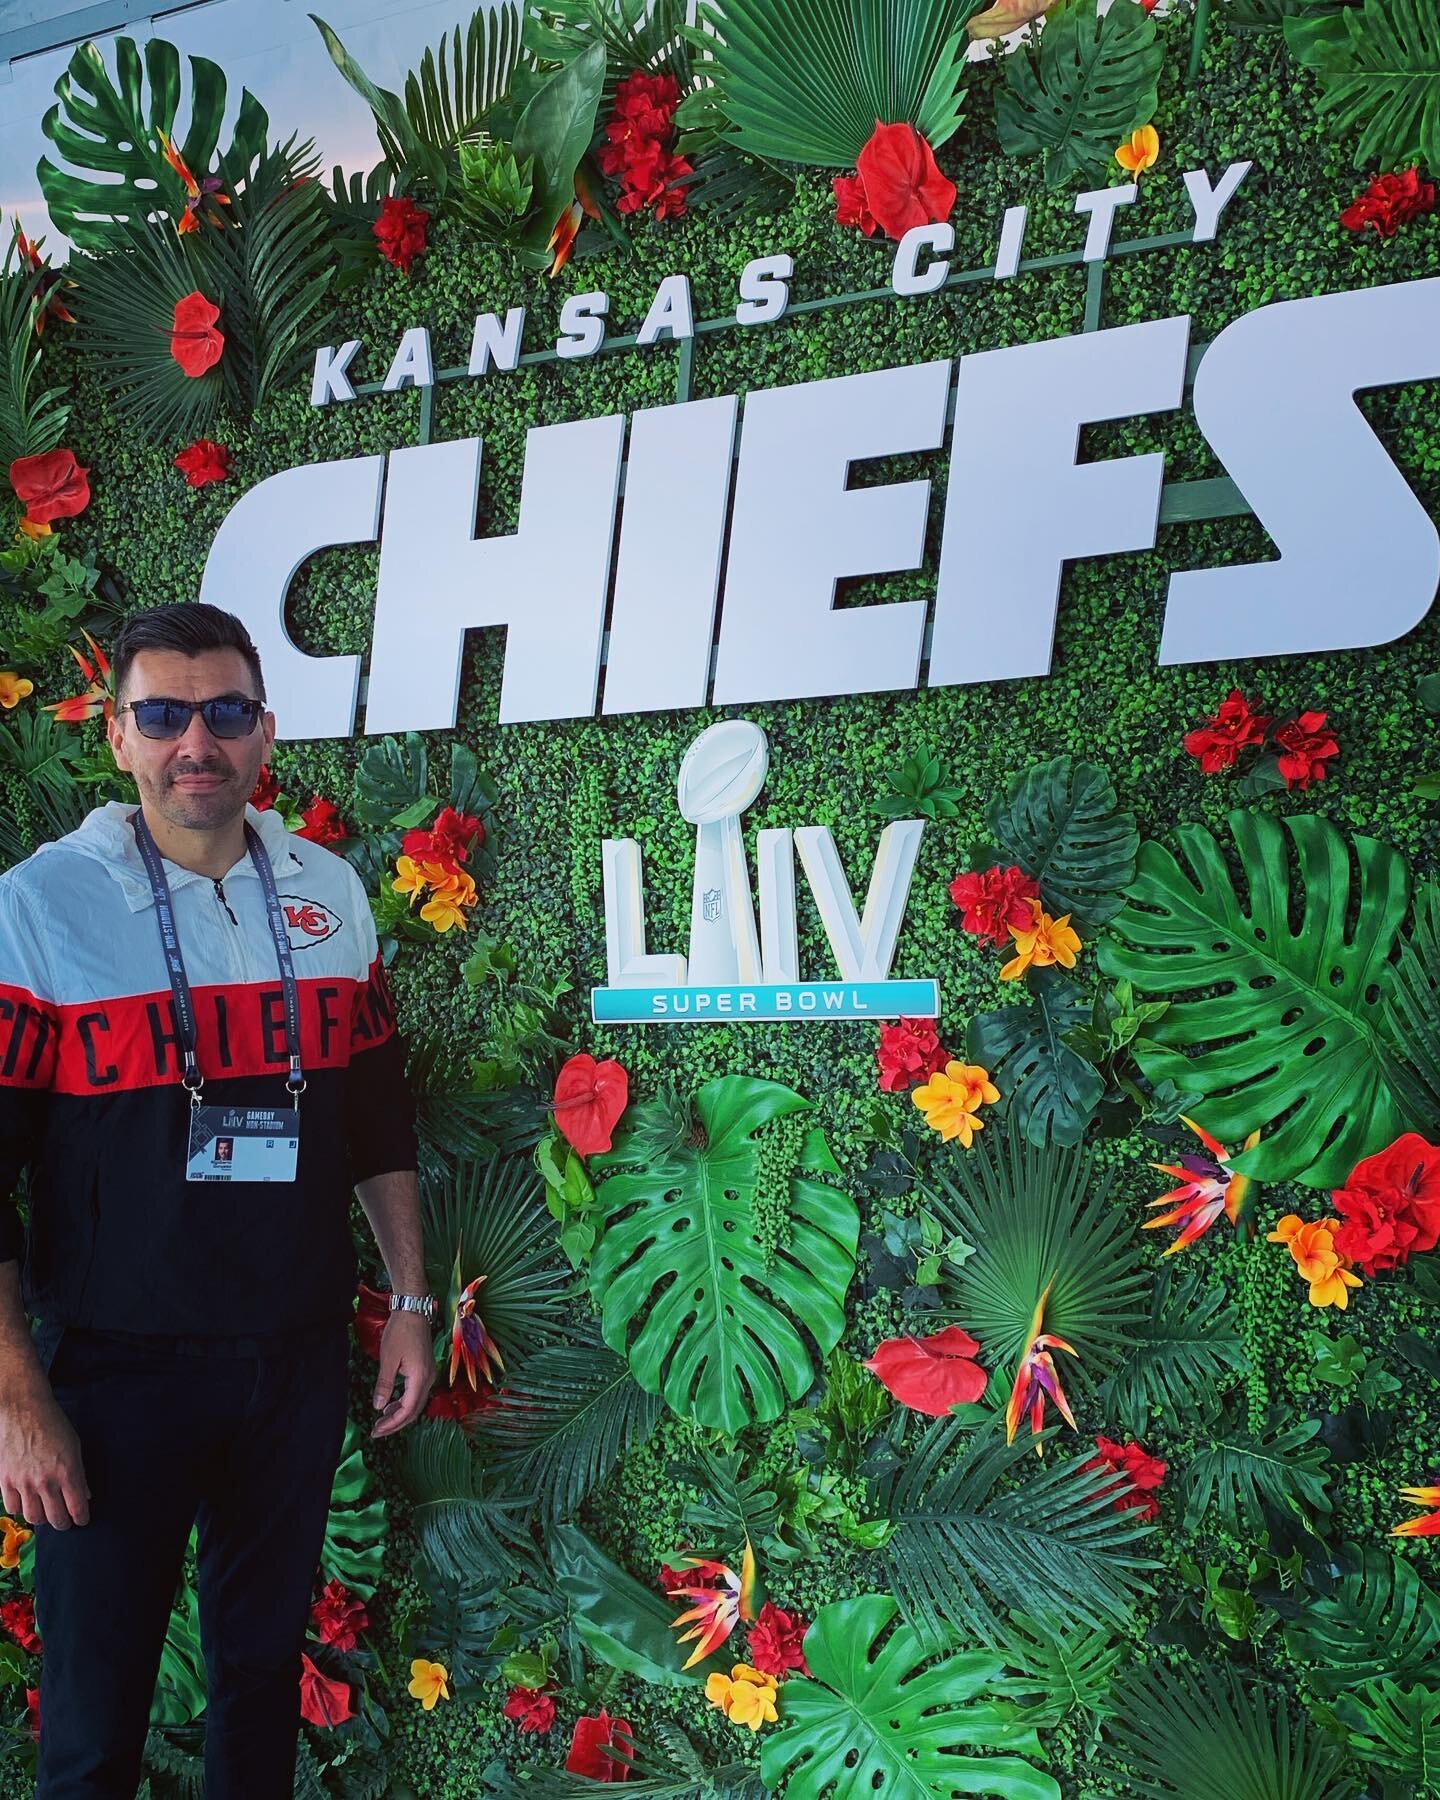 HOW &lsquo;BOUT THOSE CHIEEEEEFS?!?!?!

Insane to think it&rsquo;s been almost a year since I dj&rsquo;ed at the Super Bowl for the World Champs. Oh how I miss the energy of live events. #chiefs #kansascitychiefs #SuperBowl #tampabay